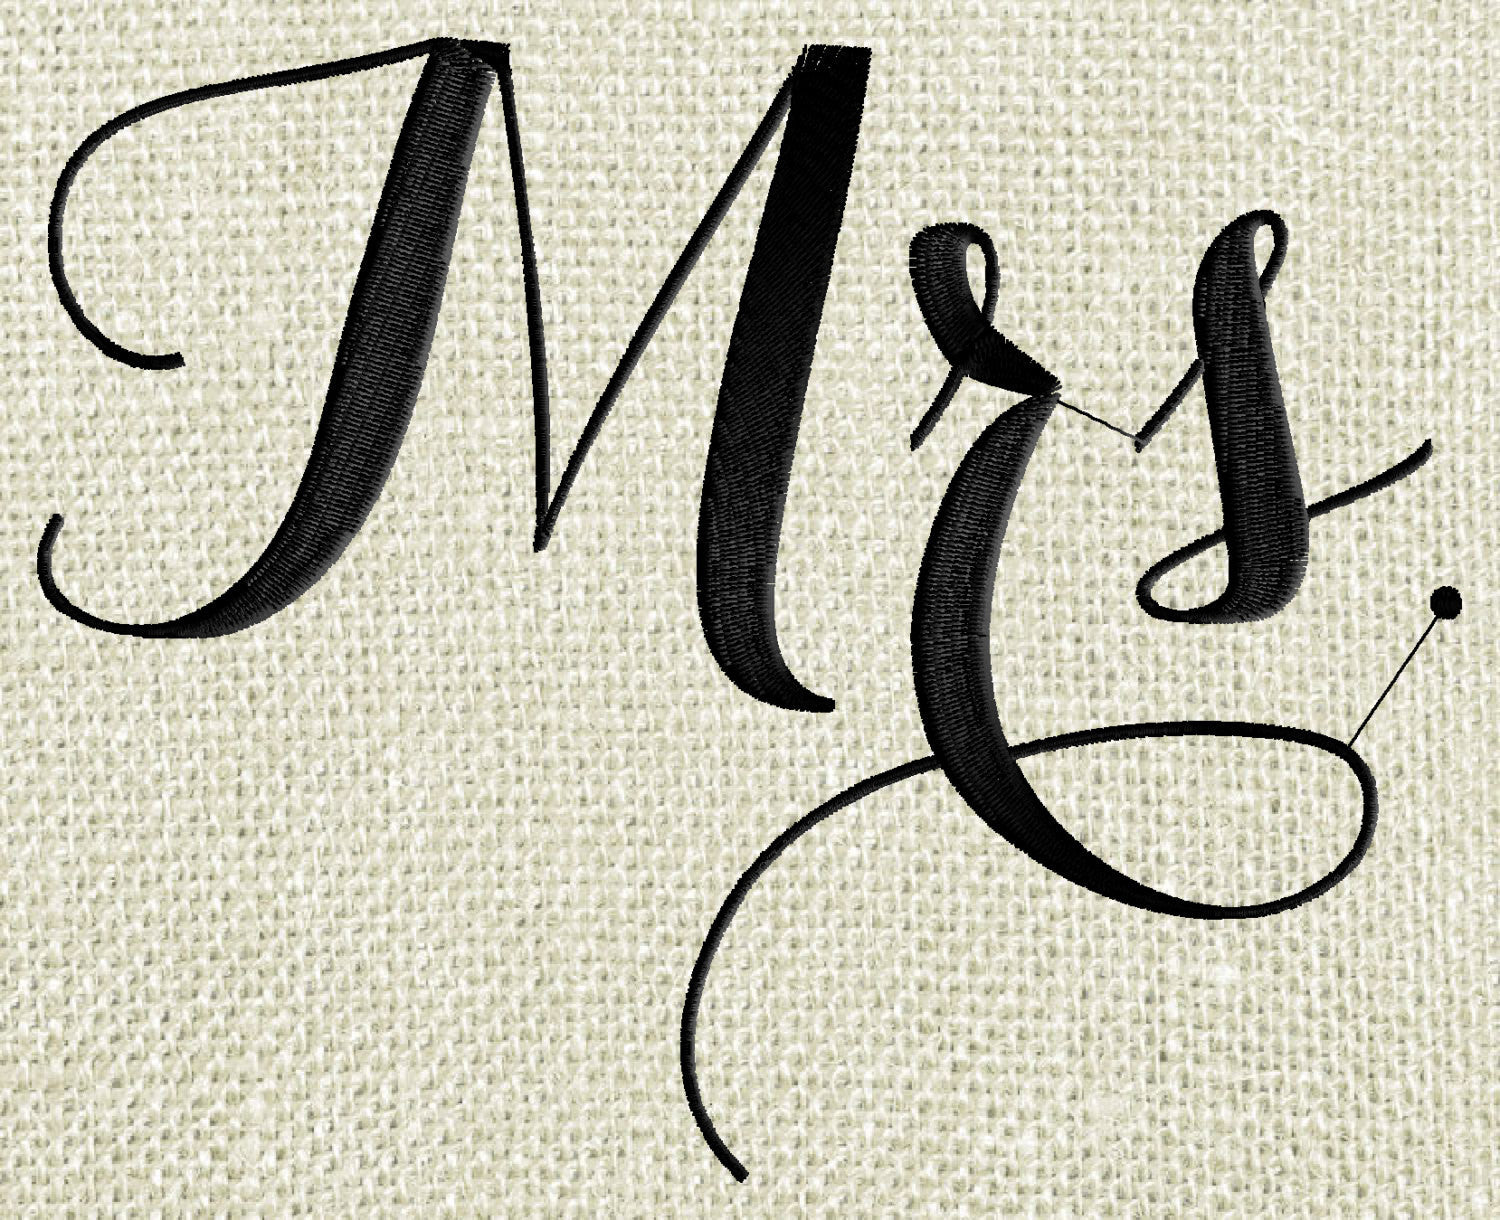 Wedding "Mr" and" Mrs" EMBROIDERY DESIGN FILE - Instant download